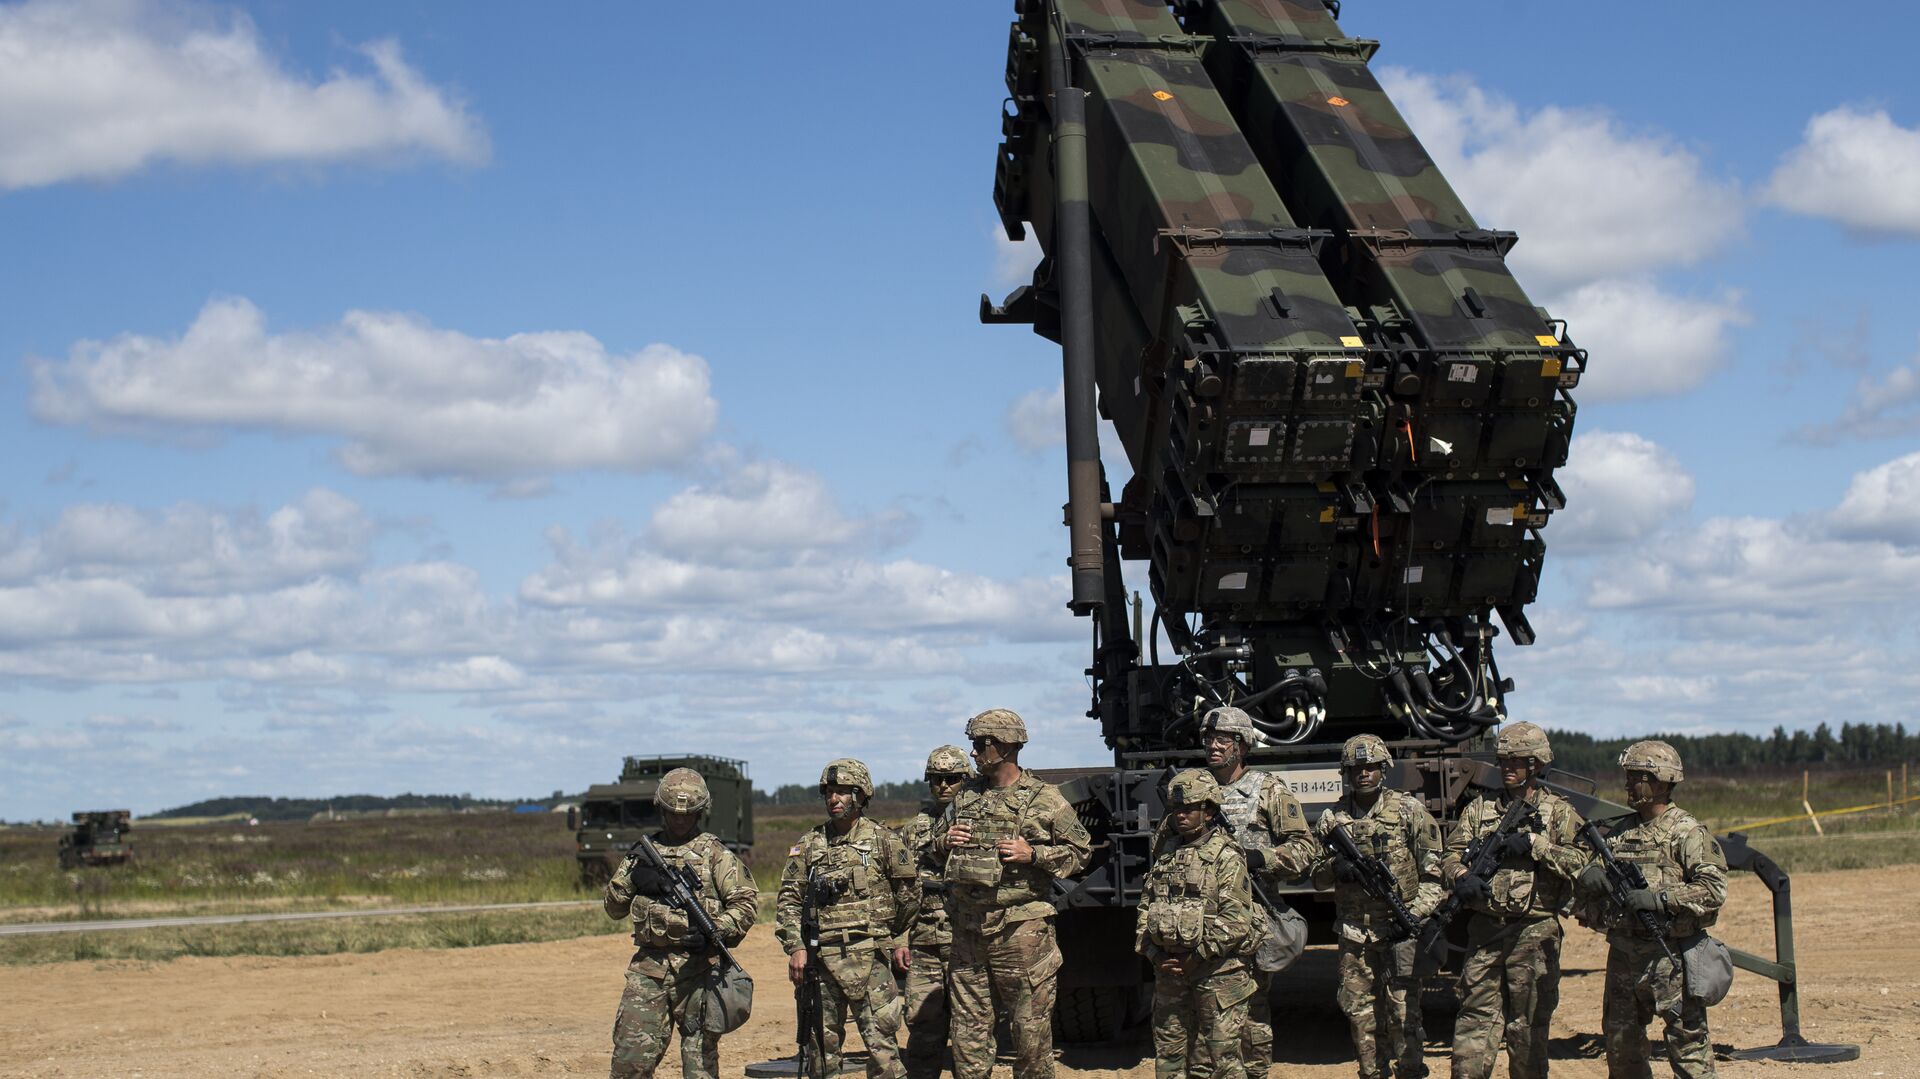 Members of US 10th Army Air and Missile Defense Command stands next to a Patriot surface-to-air missile battery during the NATO multinational ground based air defence units exercise Tobruq Legacy 2017 at the Siauliai airbase. (File) - Sputnik International, 1920, 09.01.2022